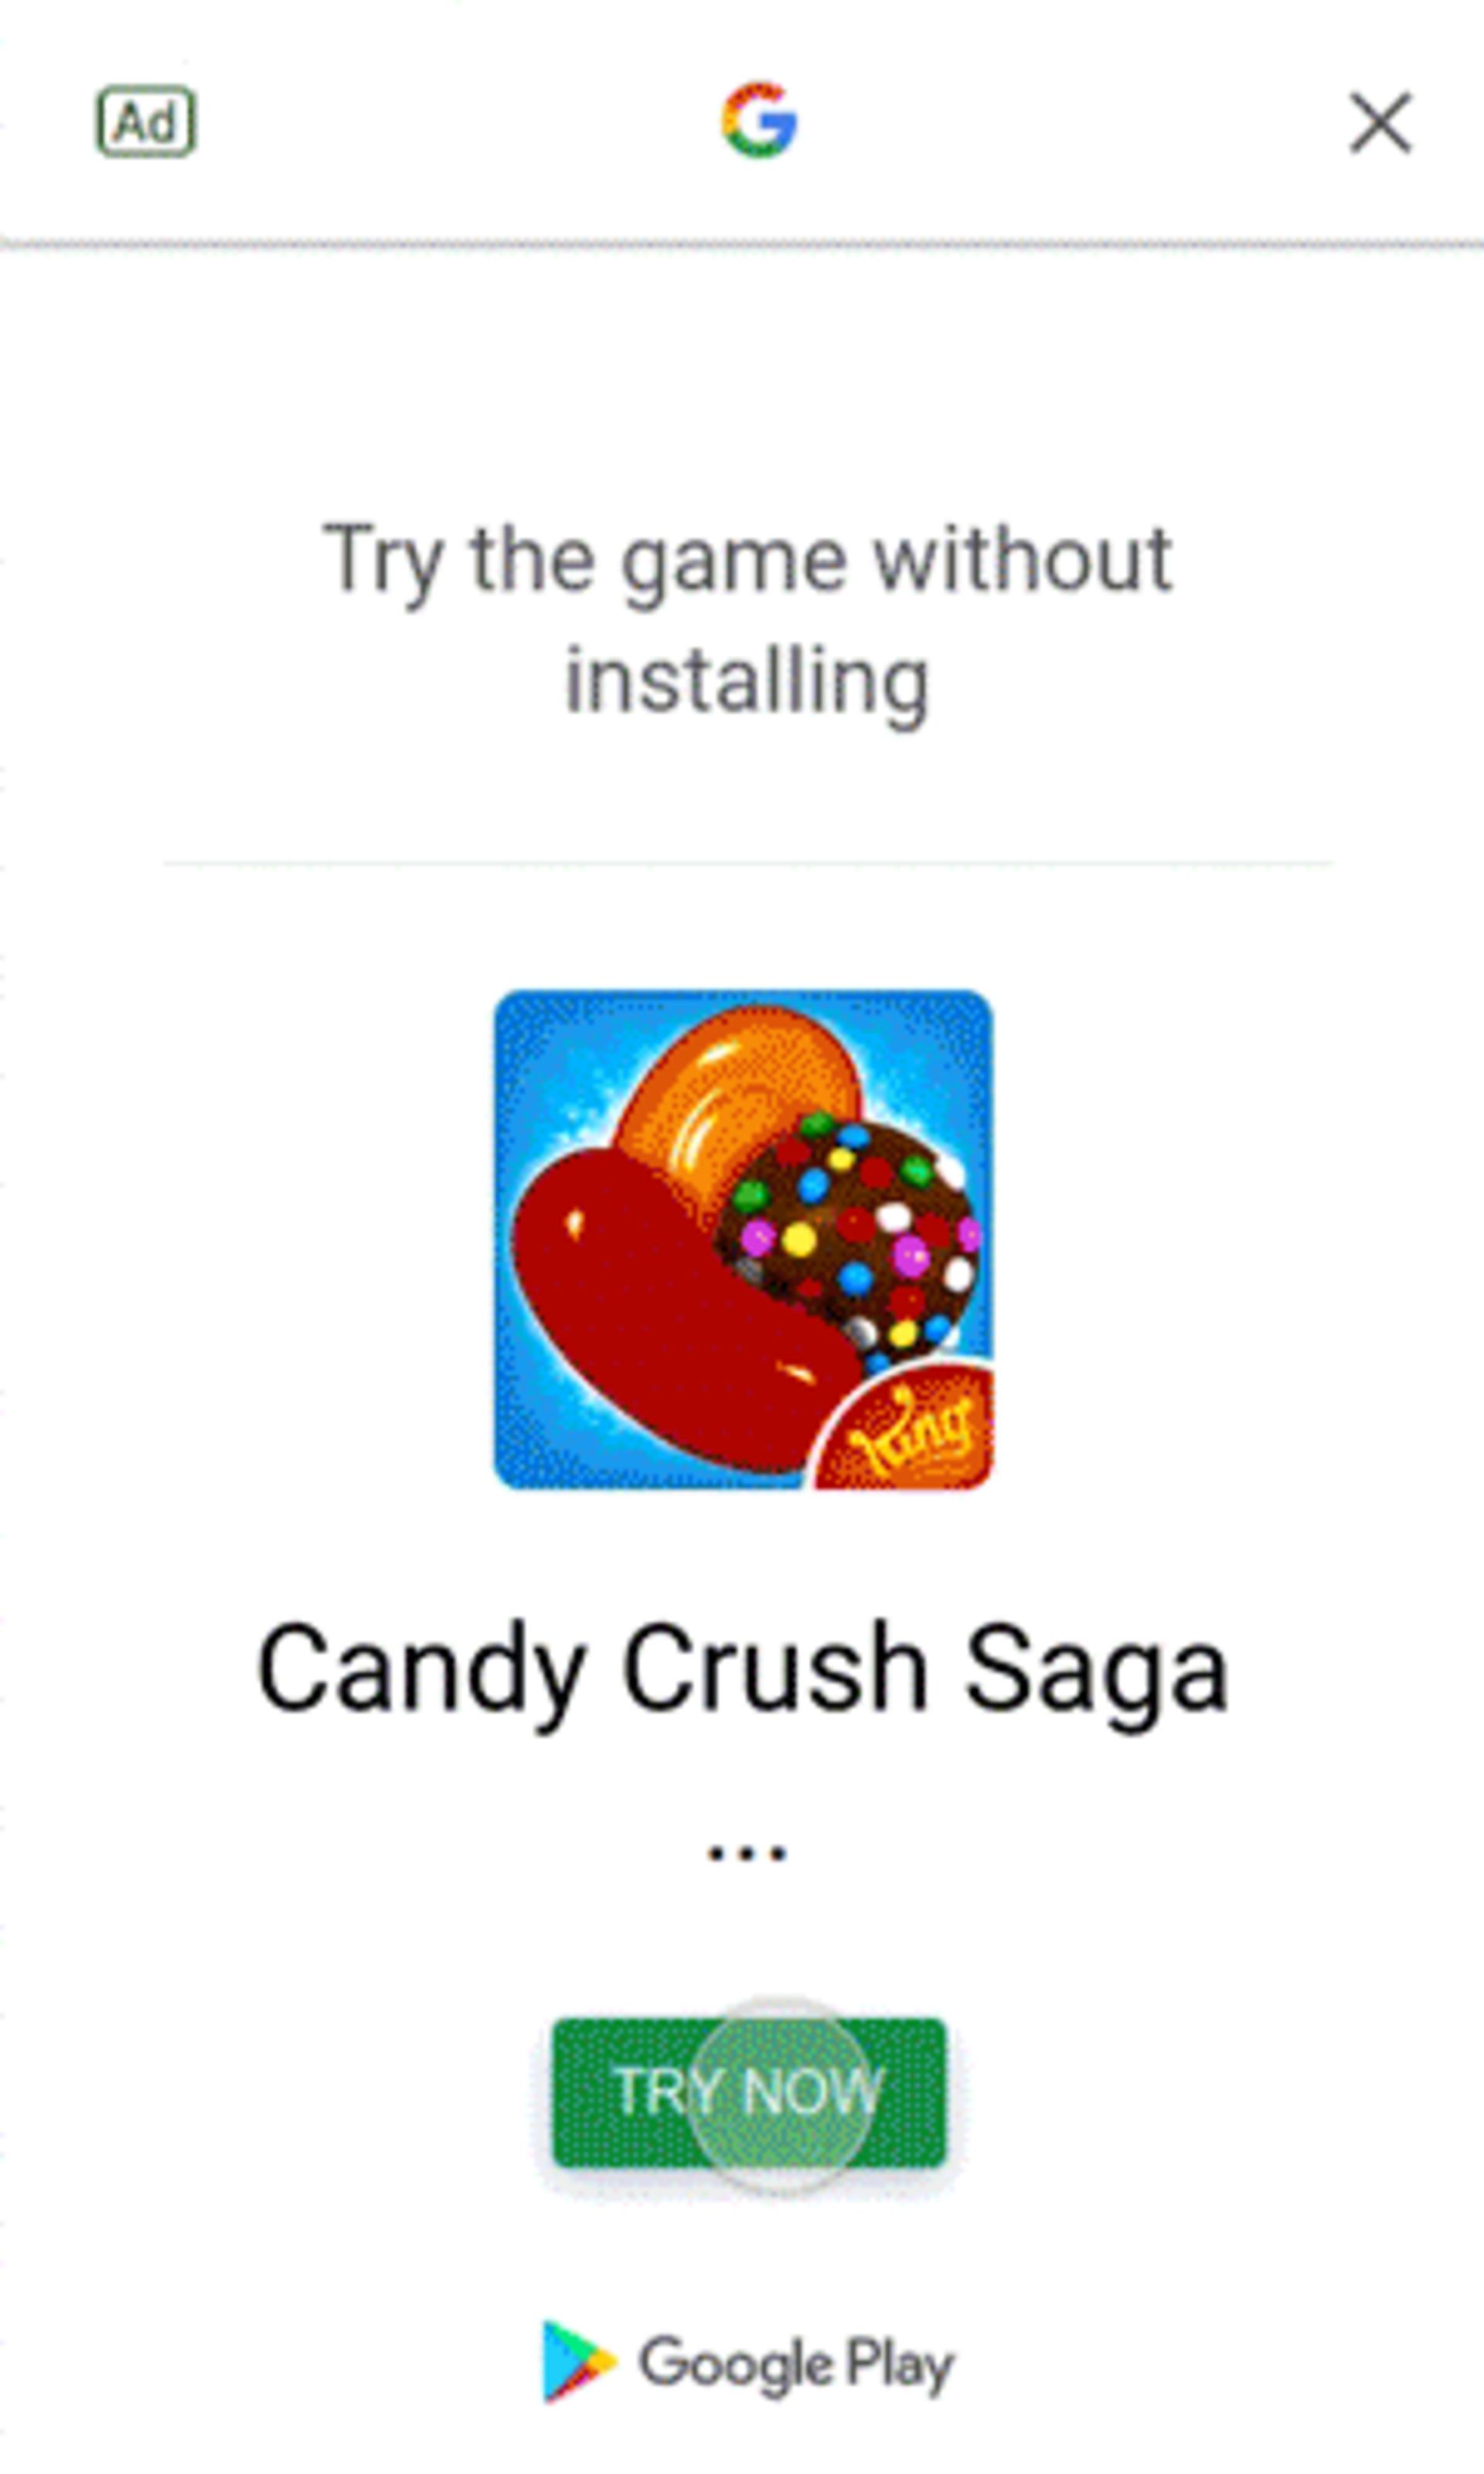 Candy crush saga try now ad